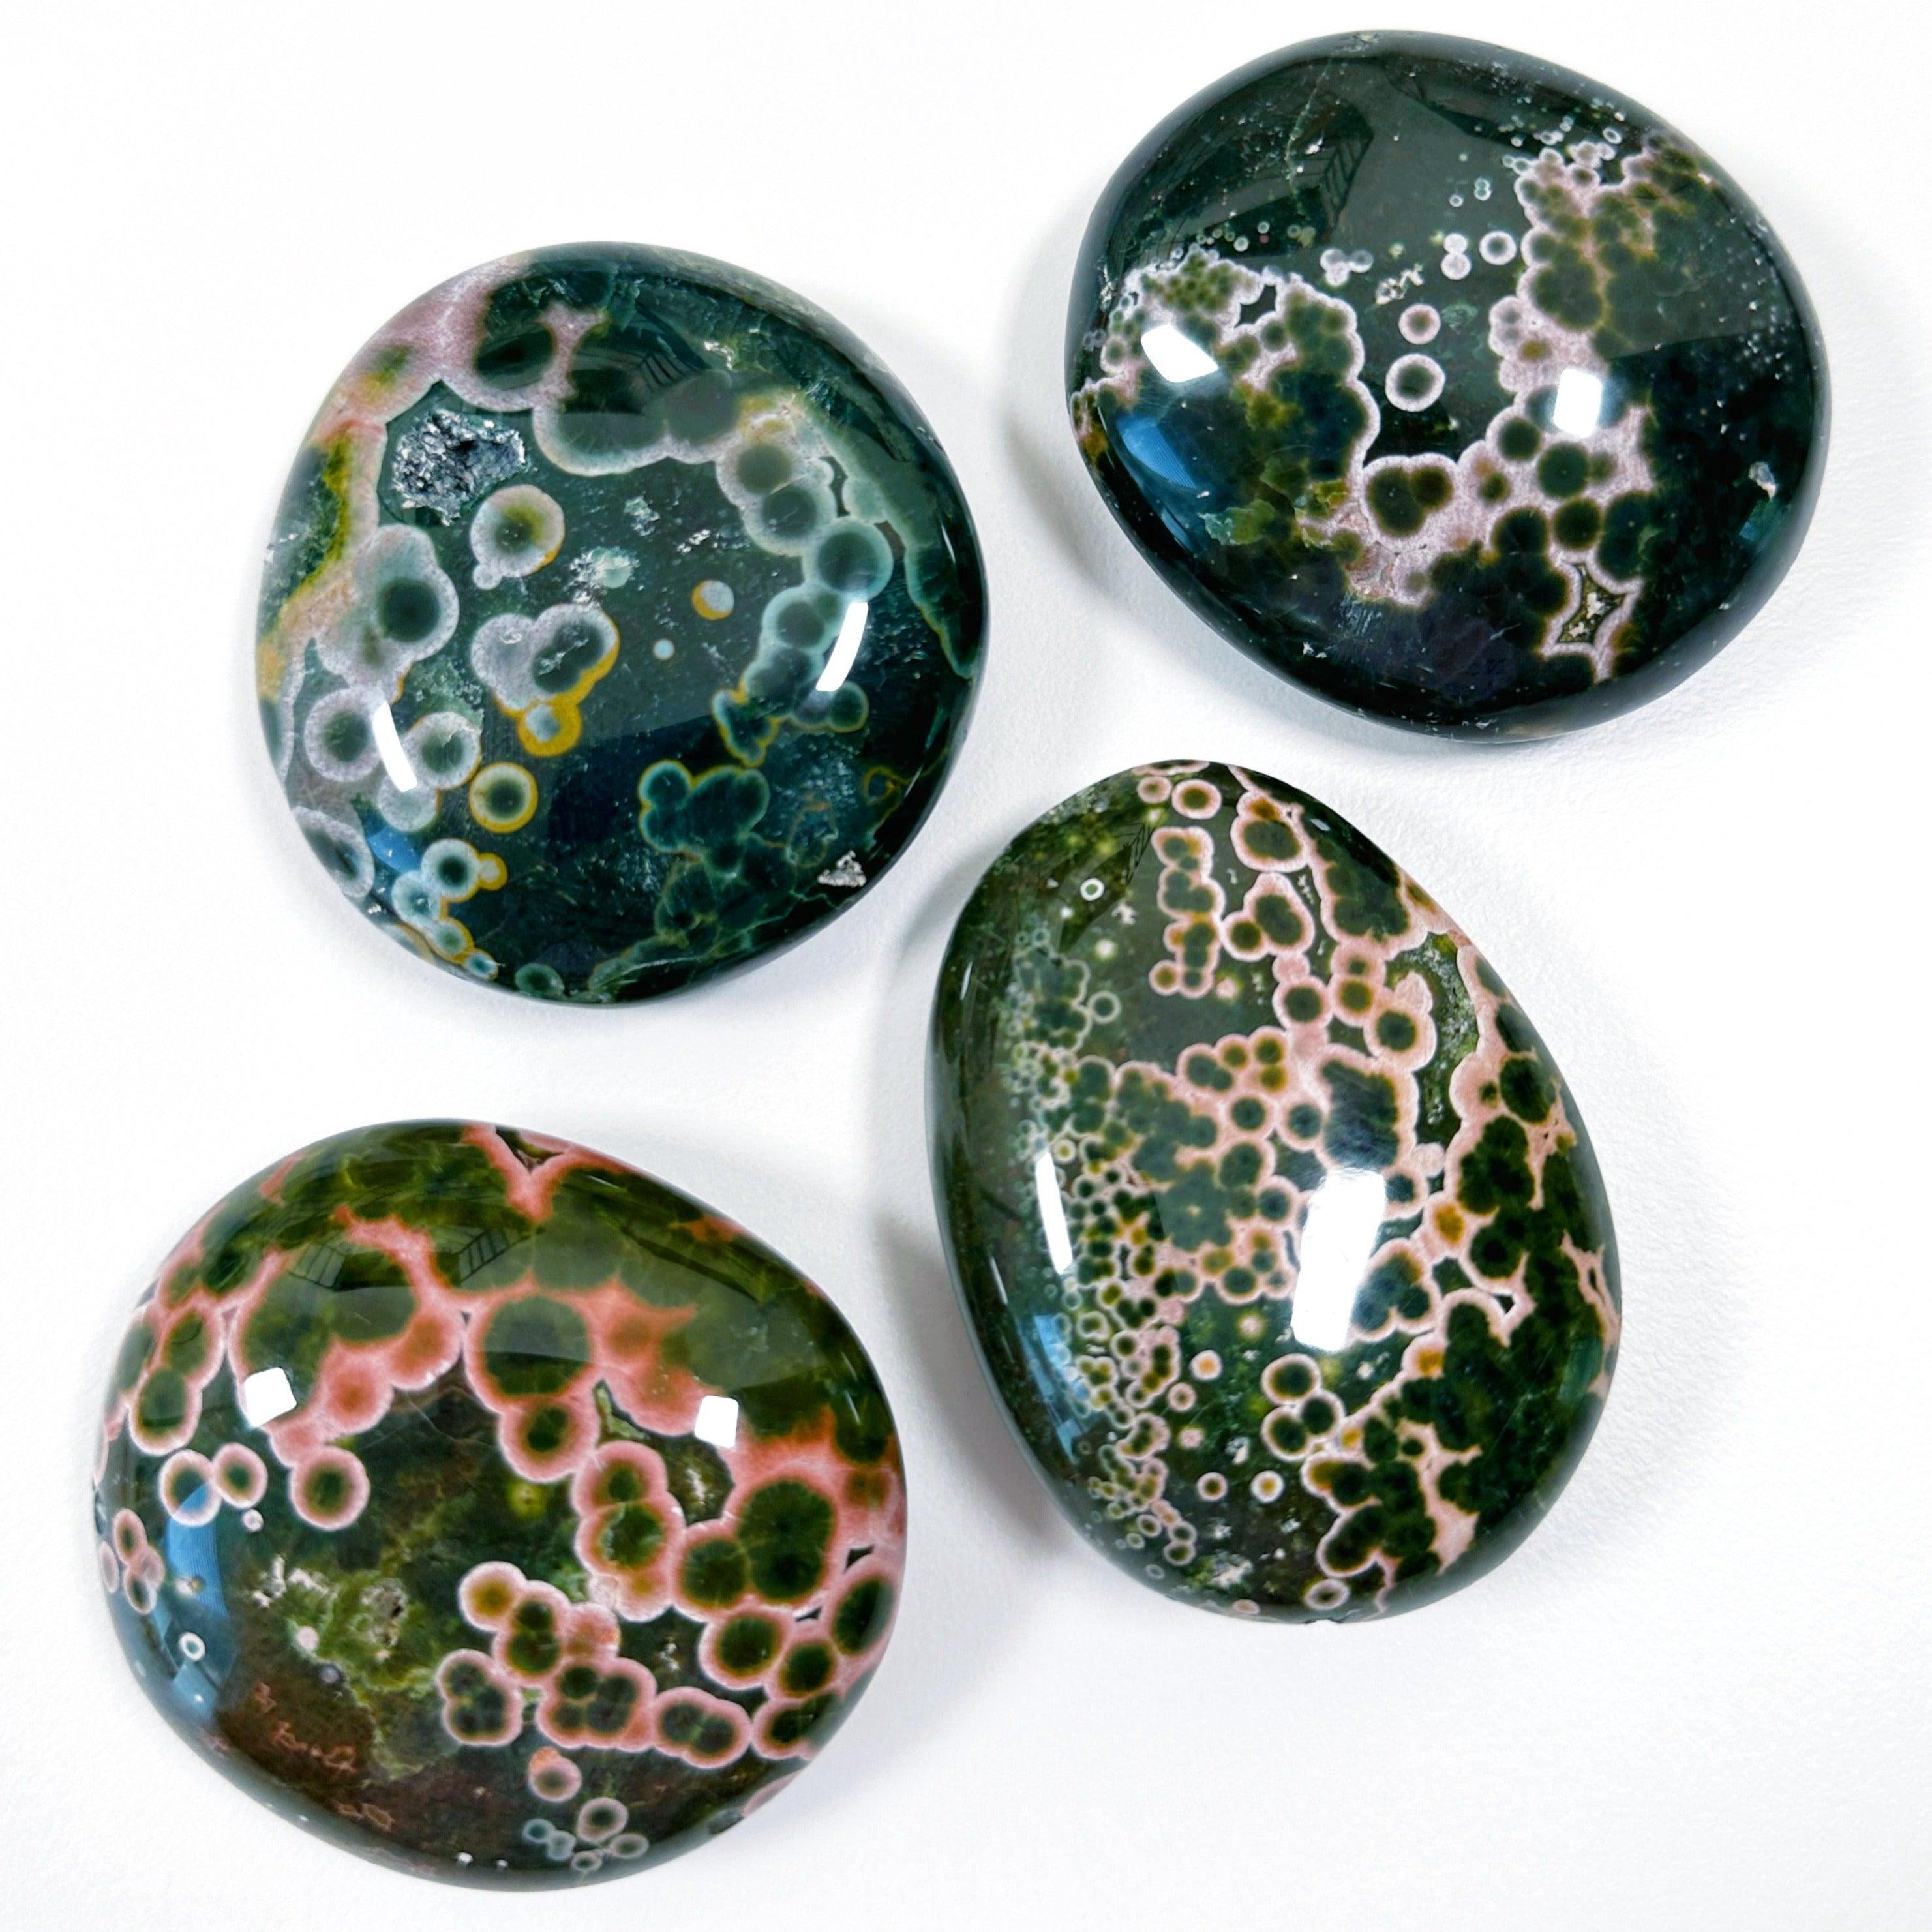 PICK YOUR OWN: KABAMBY OCEAN JASPER PALM STONE (1st QUALITY) - emotional support, kabamby, kabamby ocean jasper, north carolina gem show, ocean jasper, palm stone, palmstone, recently added - The Mineral Maven